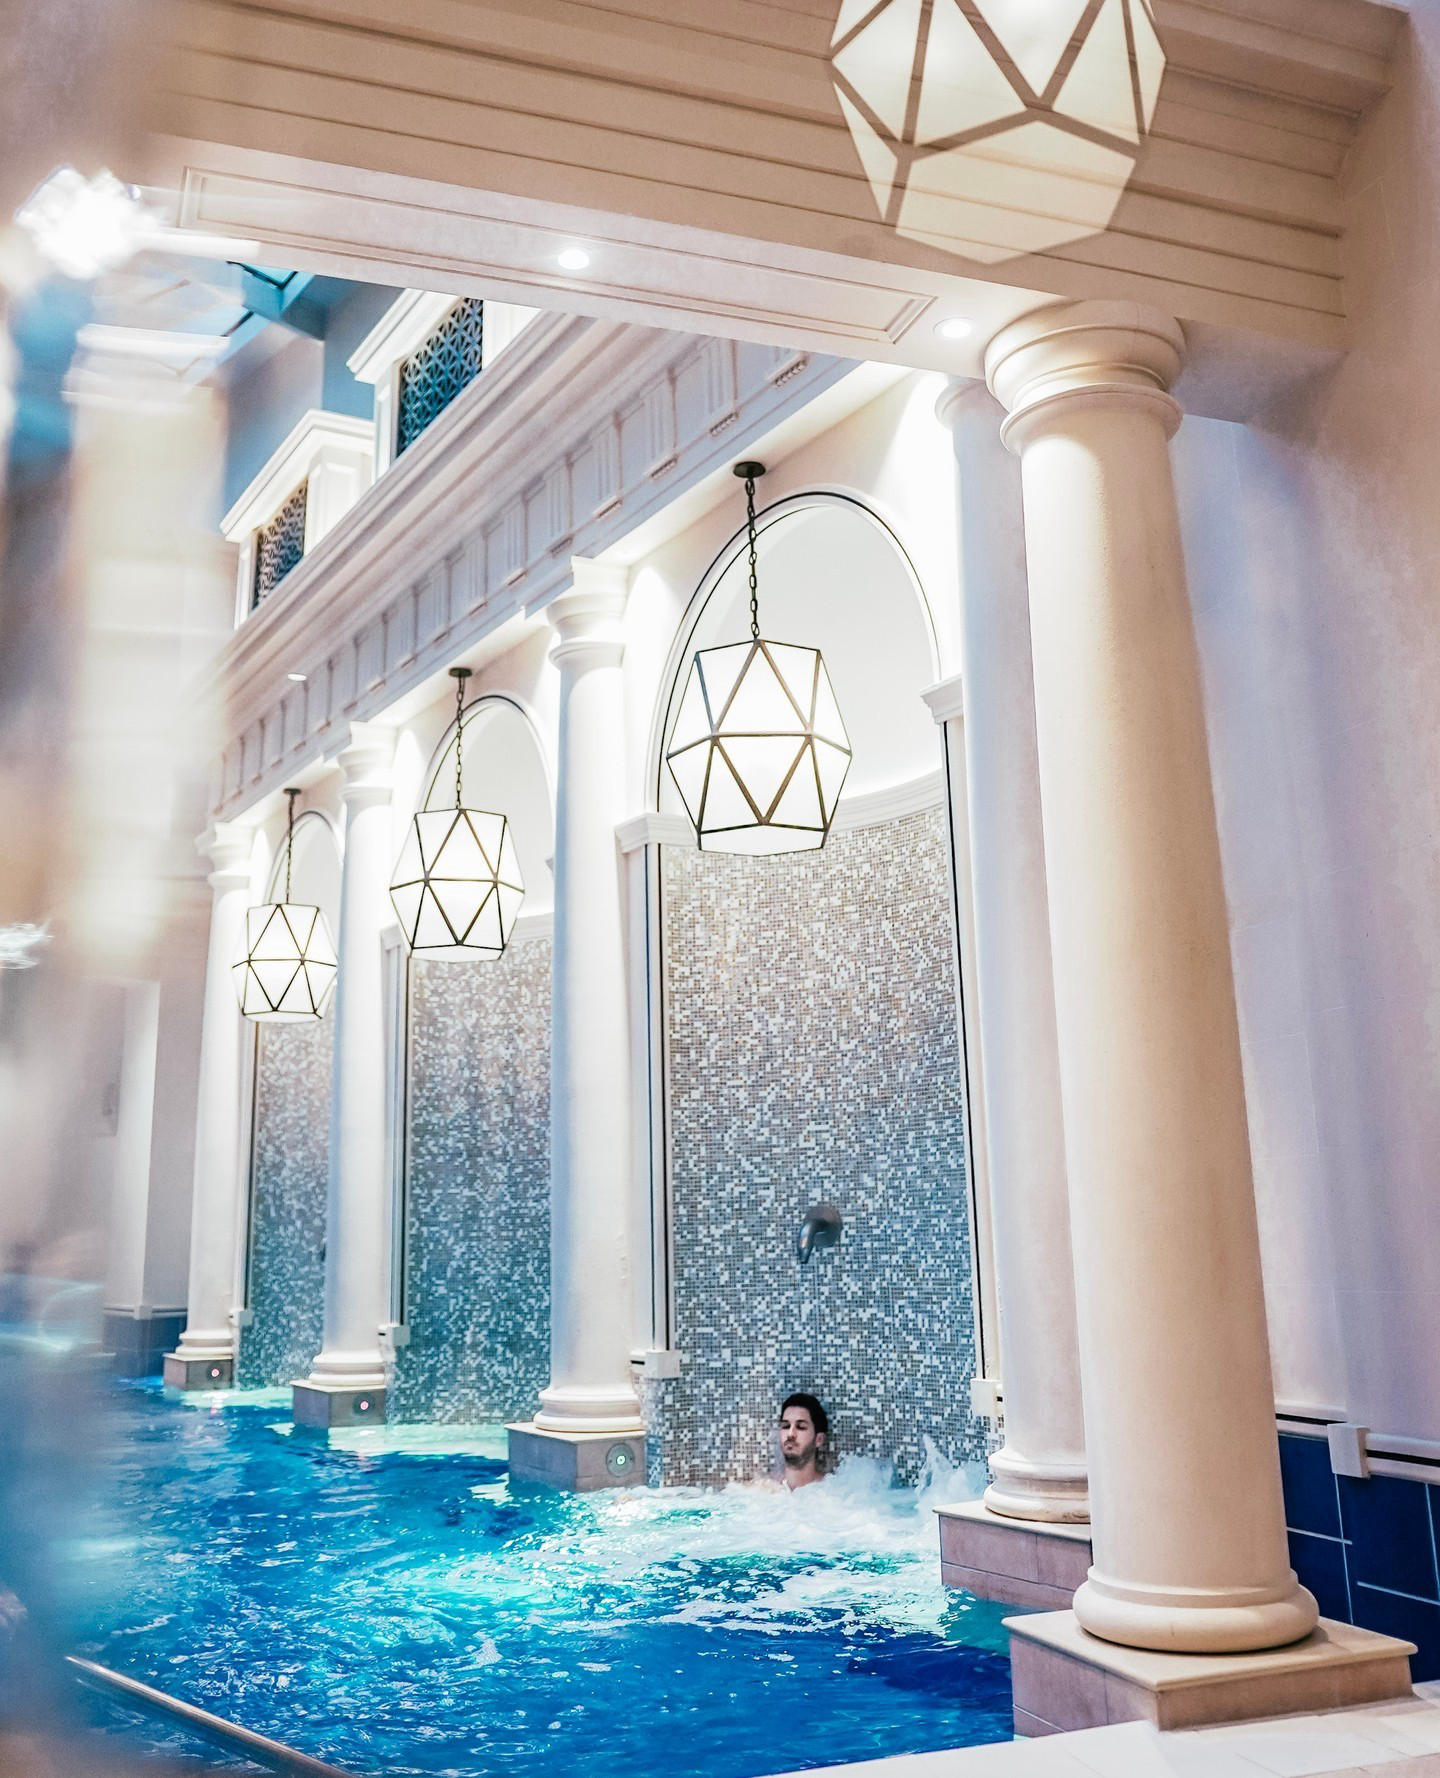 image  1 The Gainsborough Bath Spa - As the perfect wrap to the year, wash away your stresses with a dip into